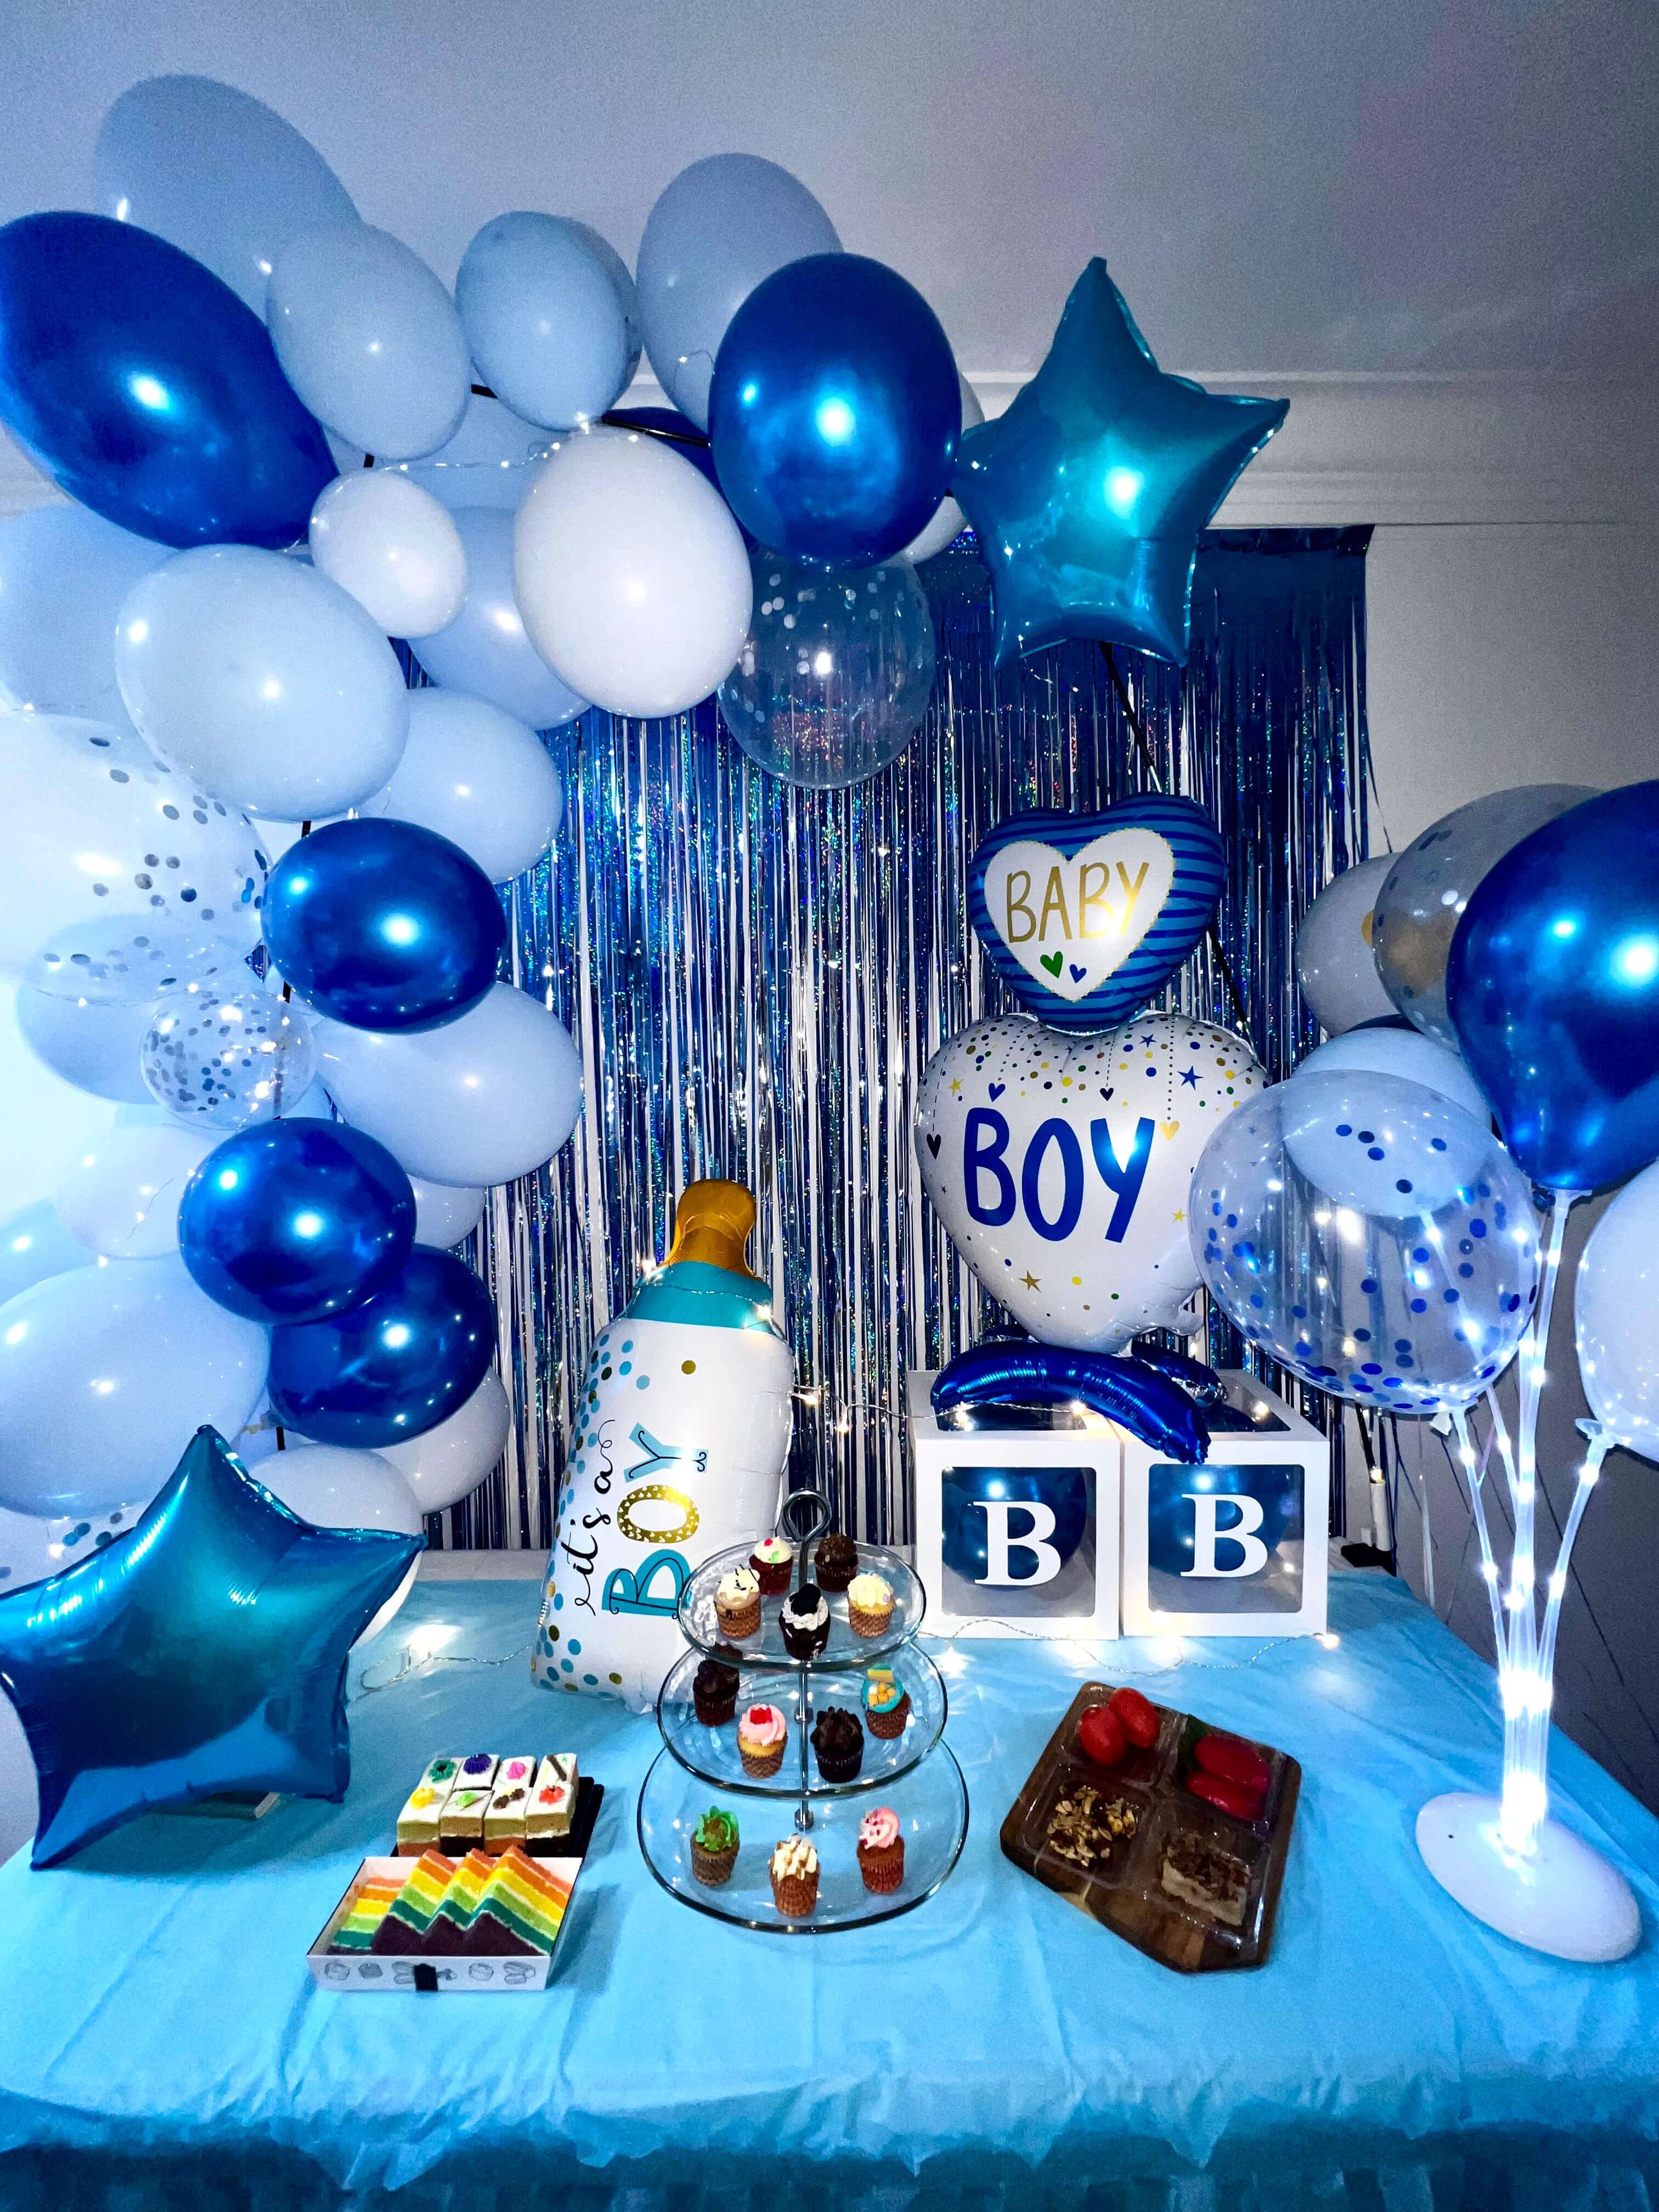 Boy baby shower decoration Discover delightful baby shower decorations, ideas, and themes at SEA Events for your little boy and girl.